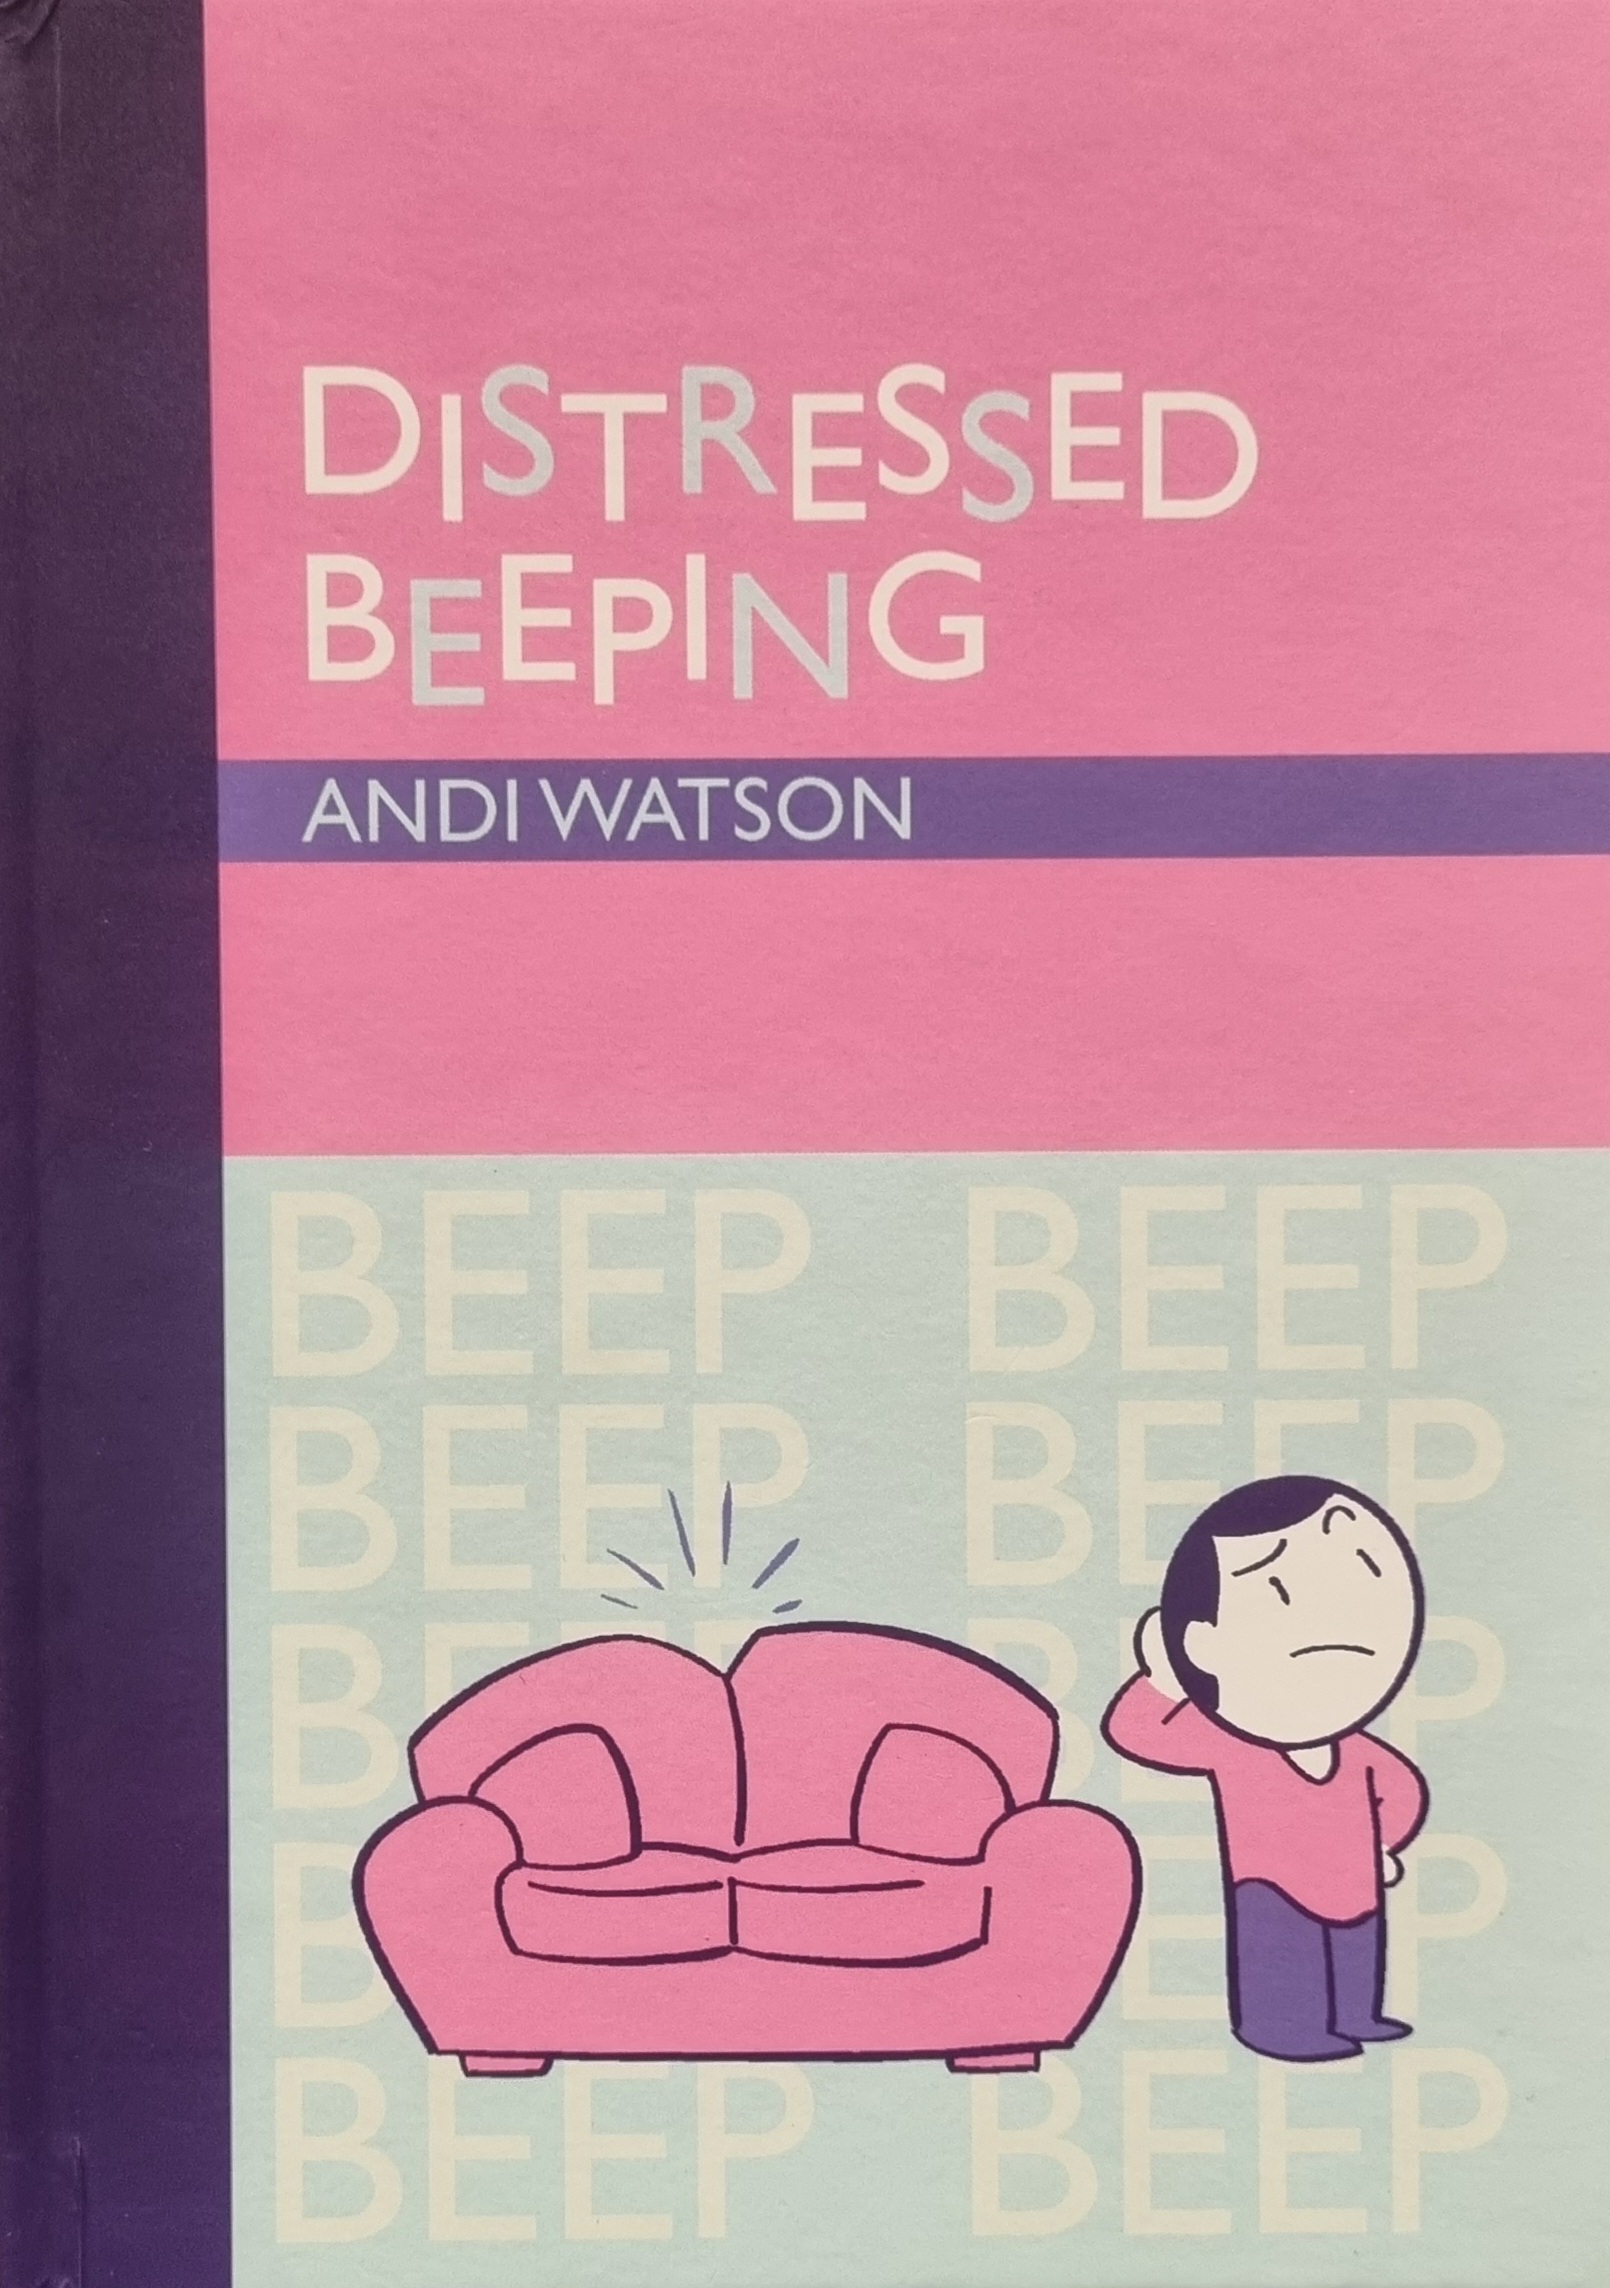 Distressed Beeping (Page 45 Signed Bookplate Edition) h/c